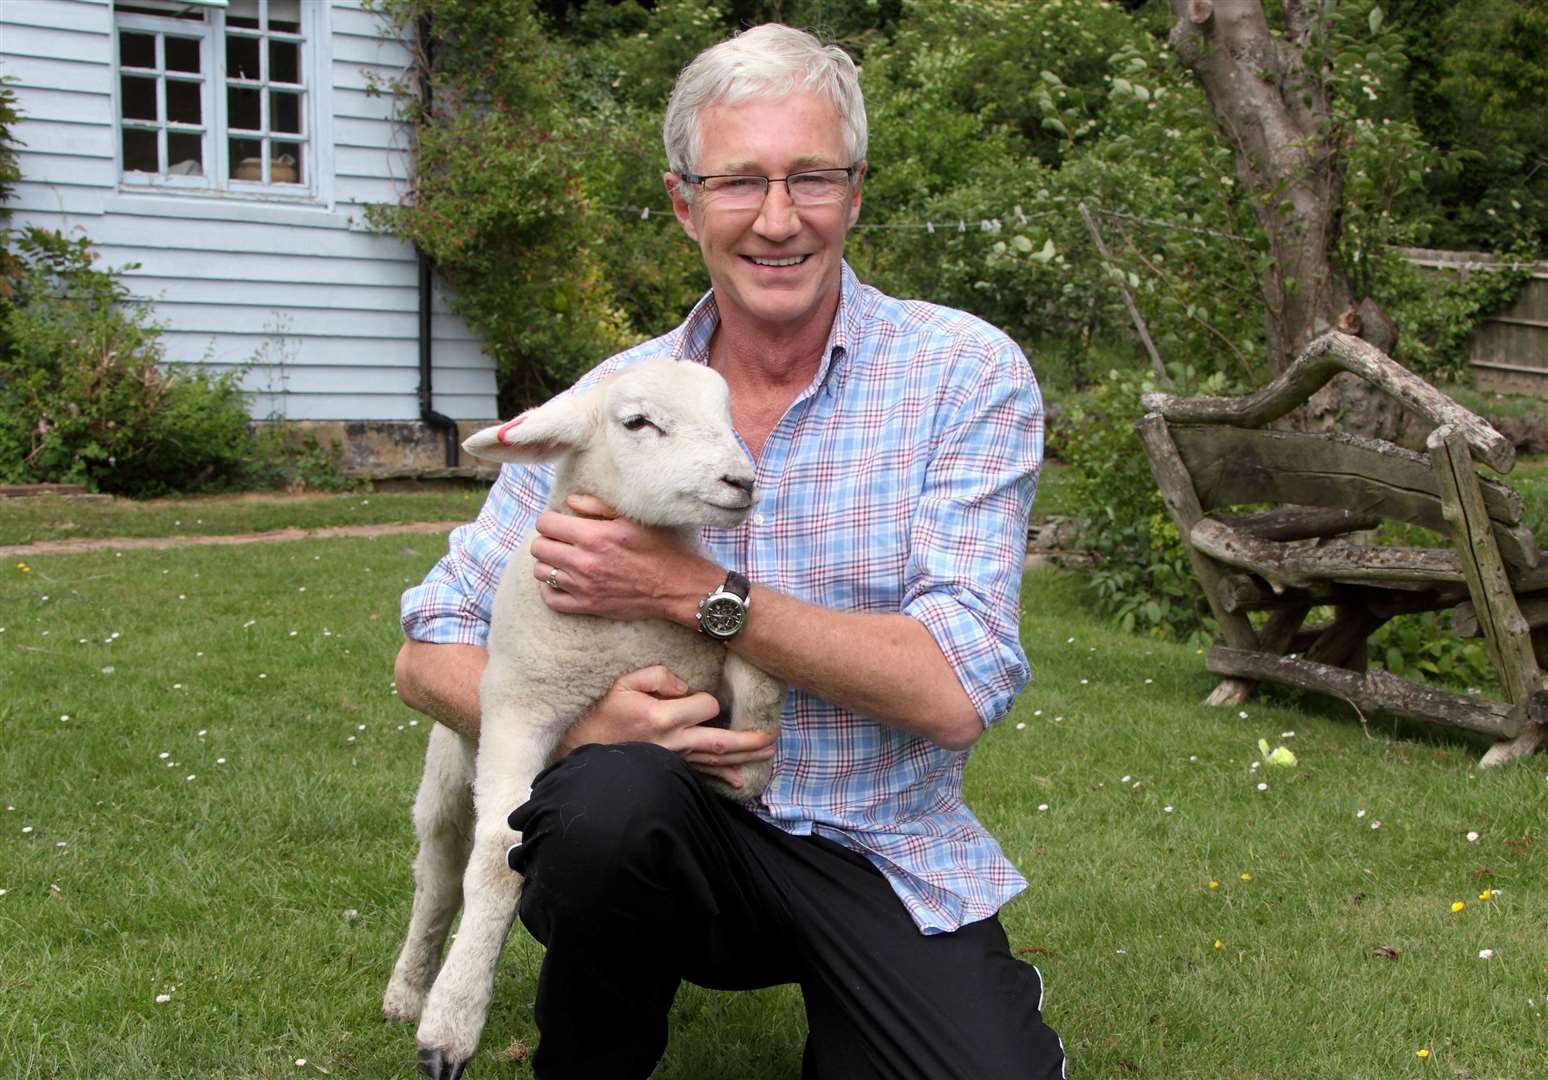 Paul O’Grady left money for animal charities in his will. Picture: Joseph Murphy/RSPCA